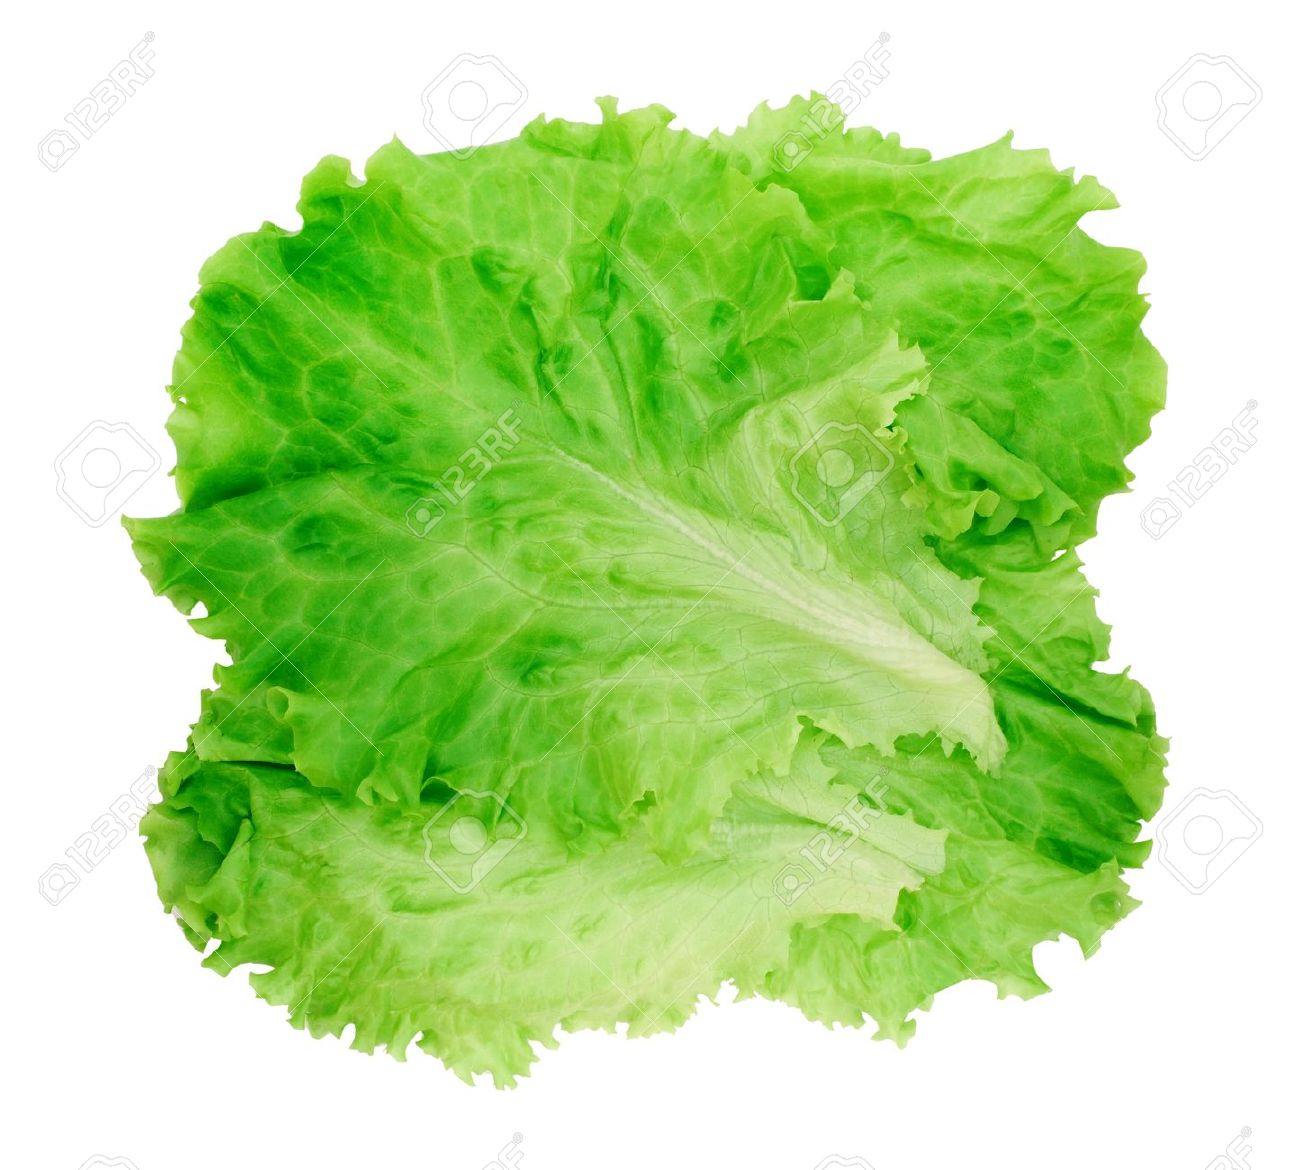 Leaf lettuce clipart - Clipground